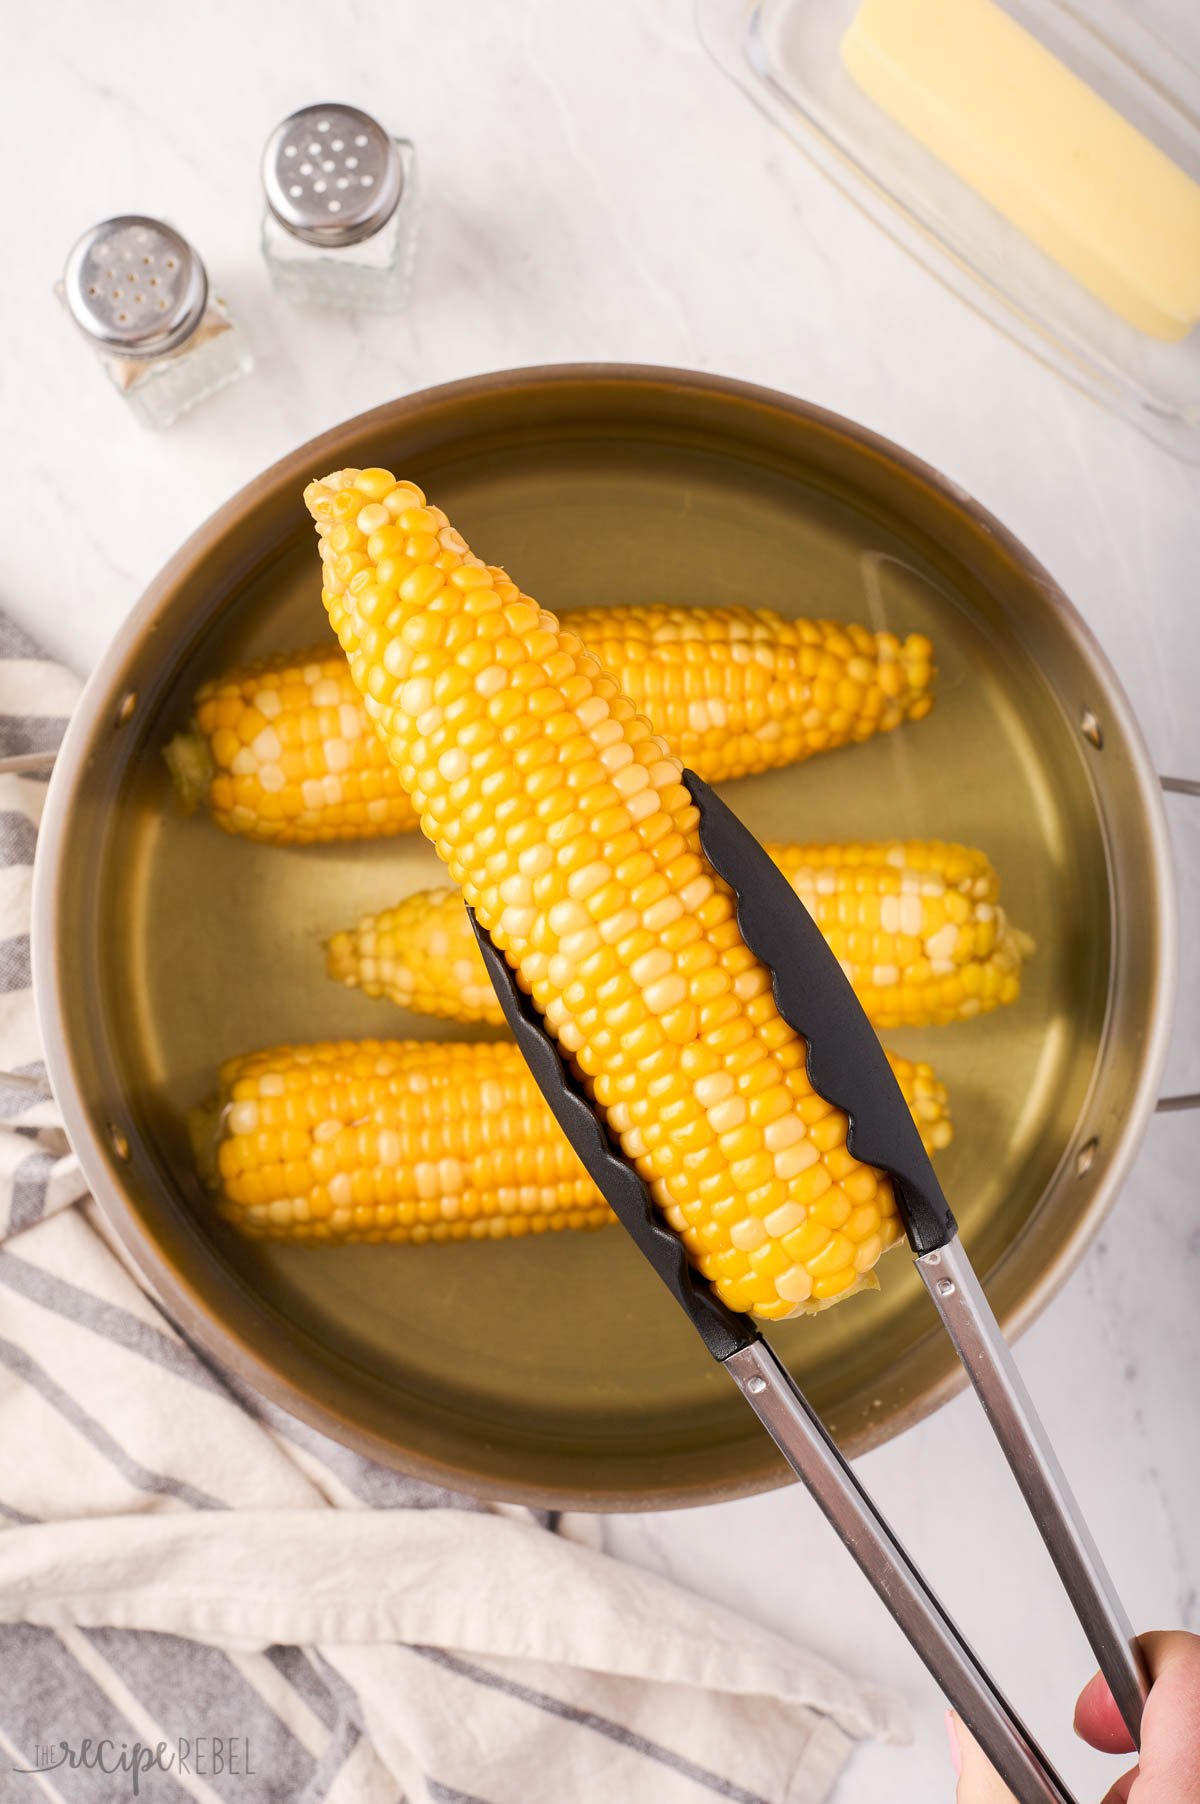 tong holding boiled corn on the cob.